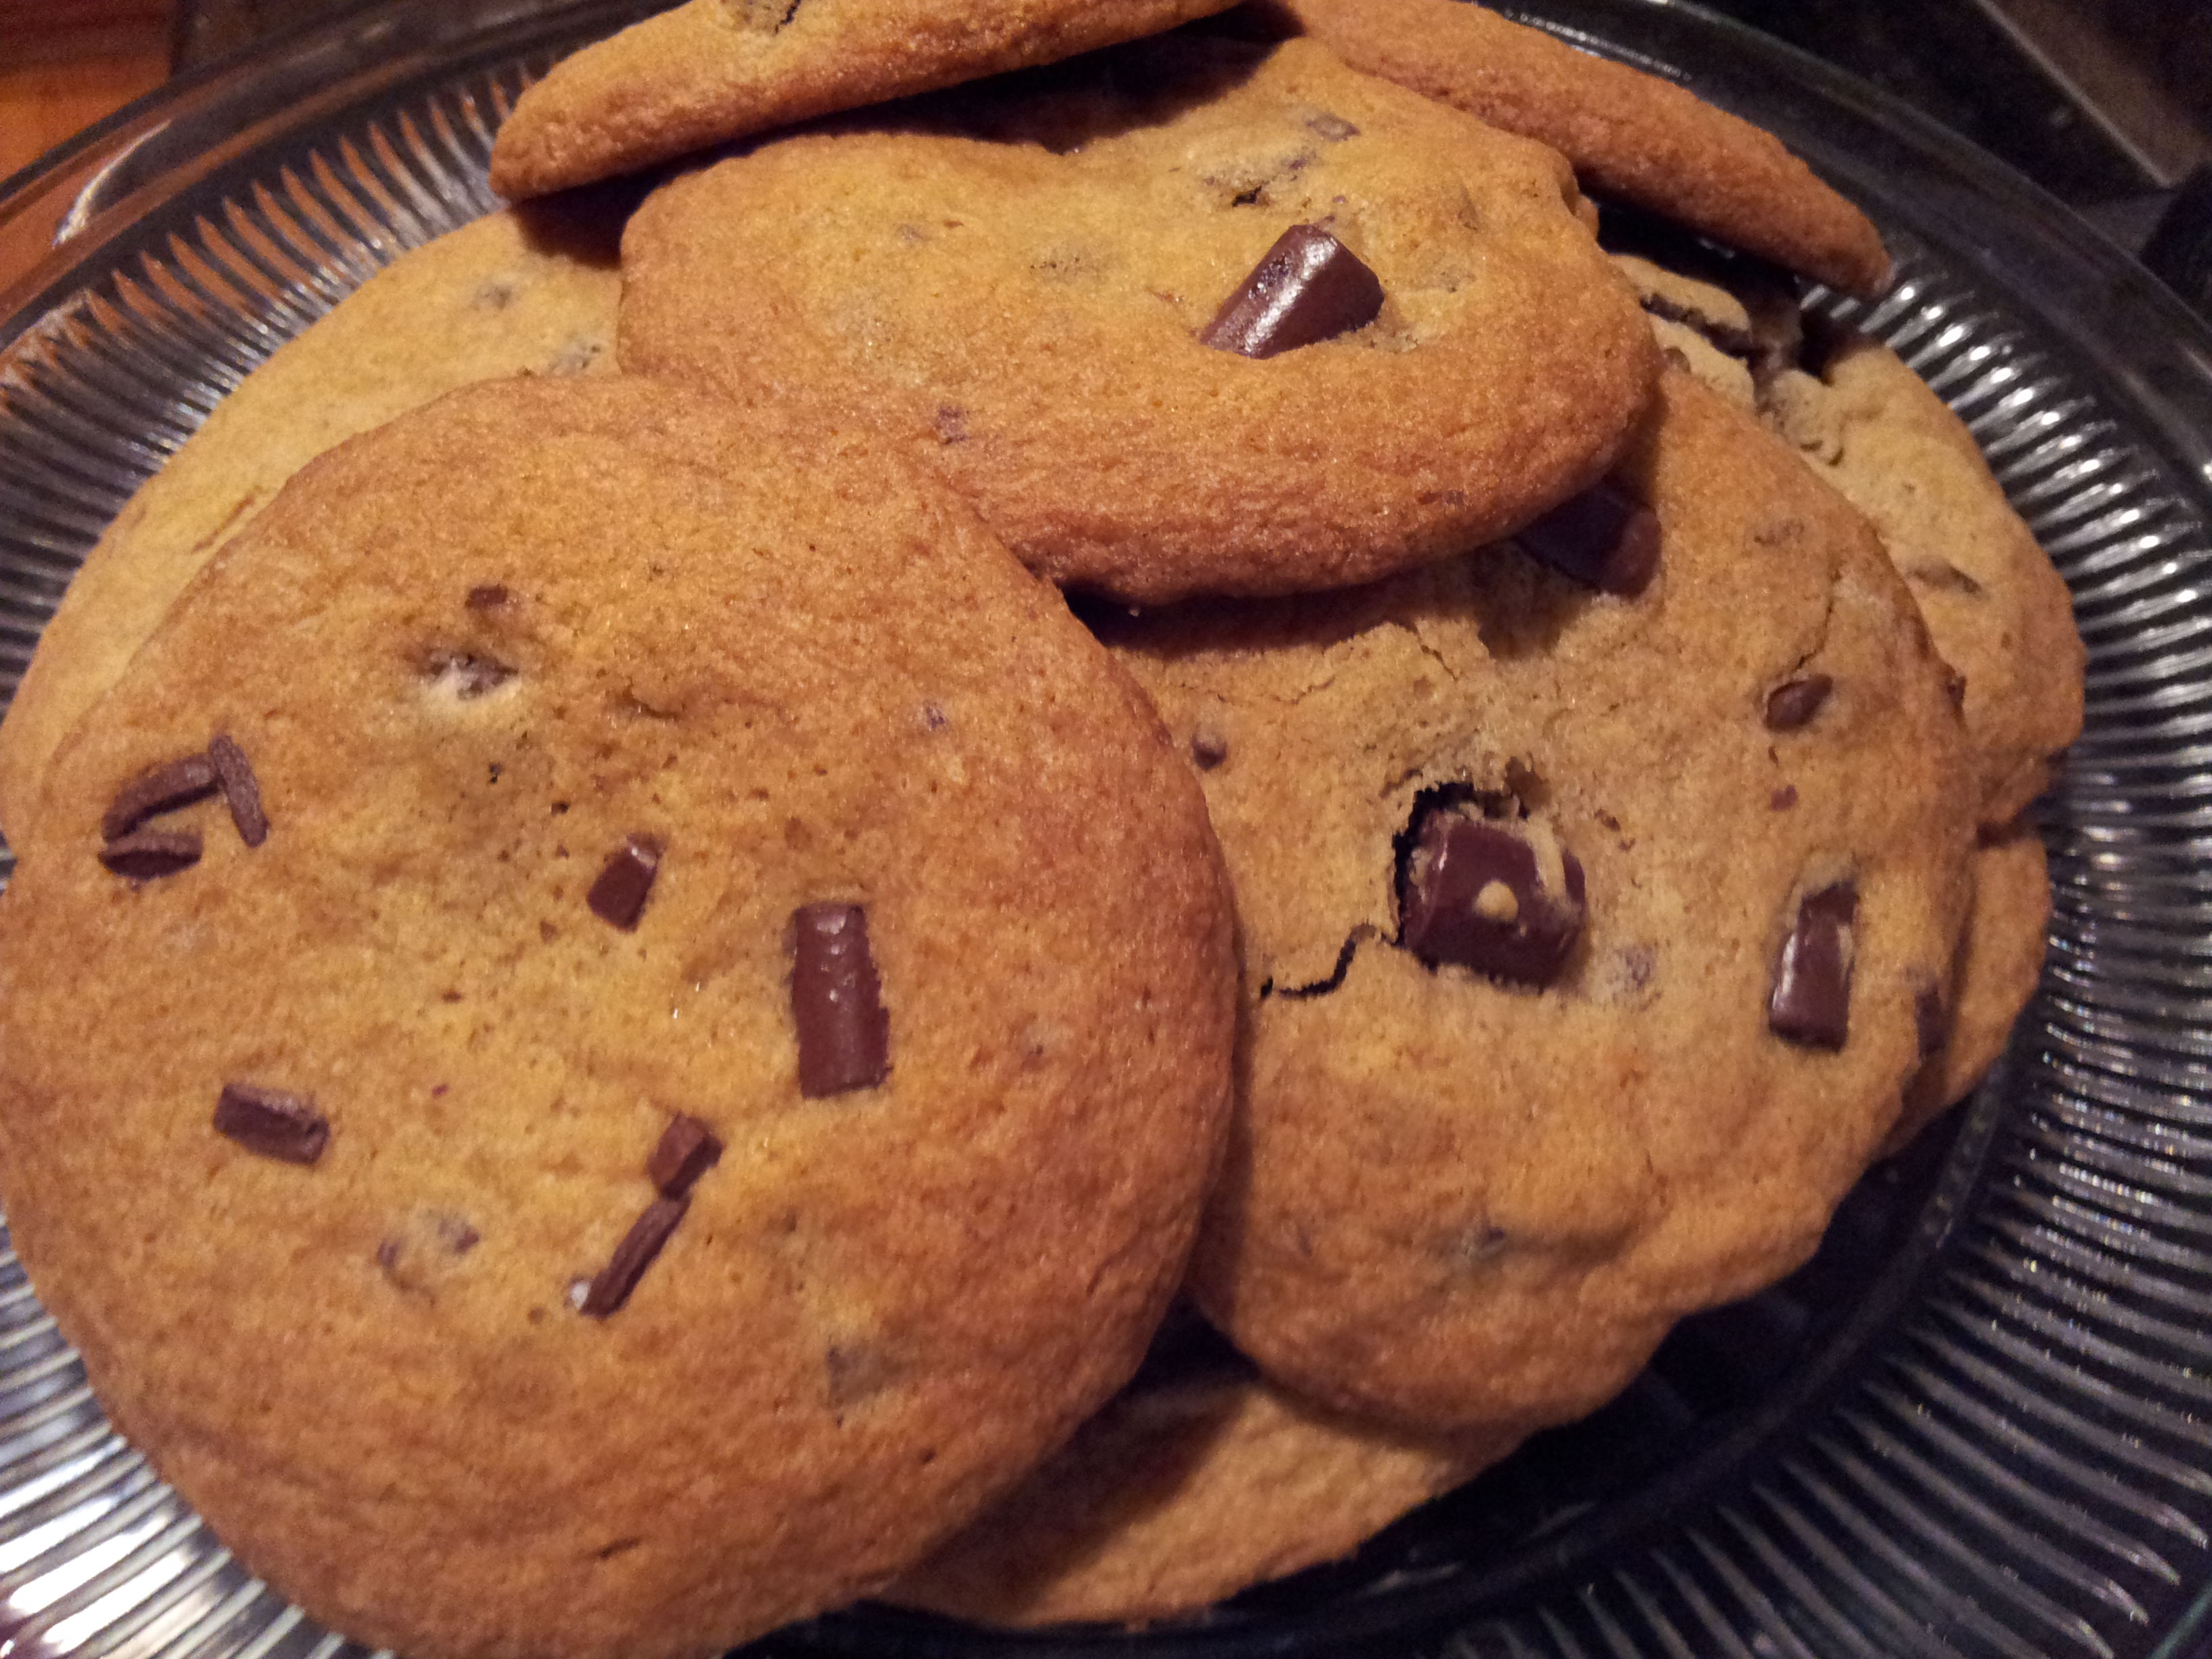 Nestle Toll House Chocolate Chunk Cookies